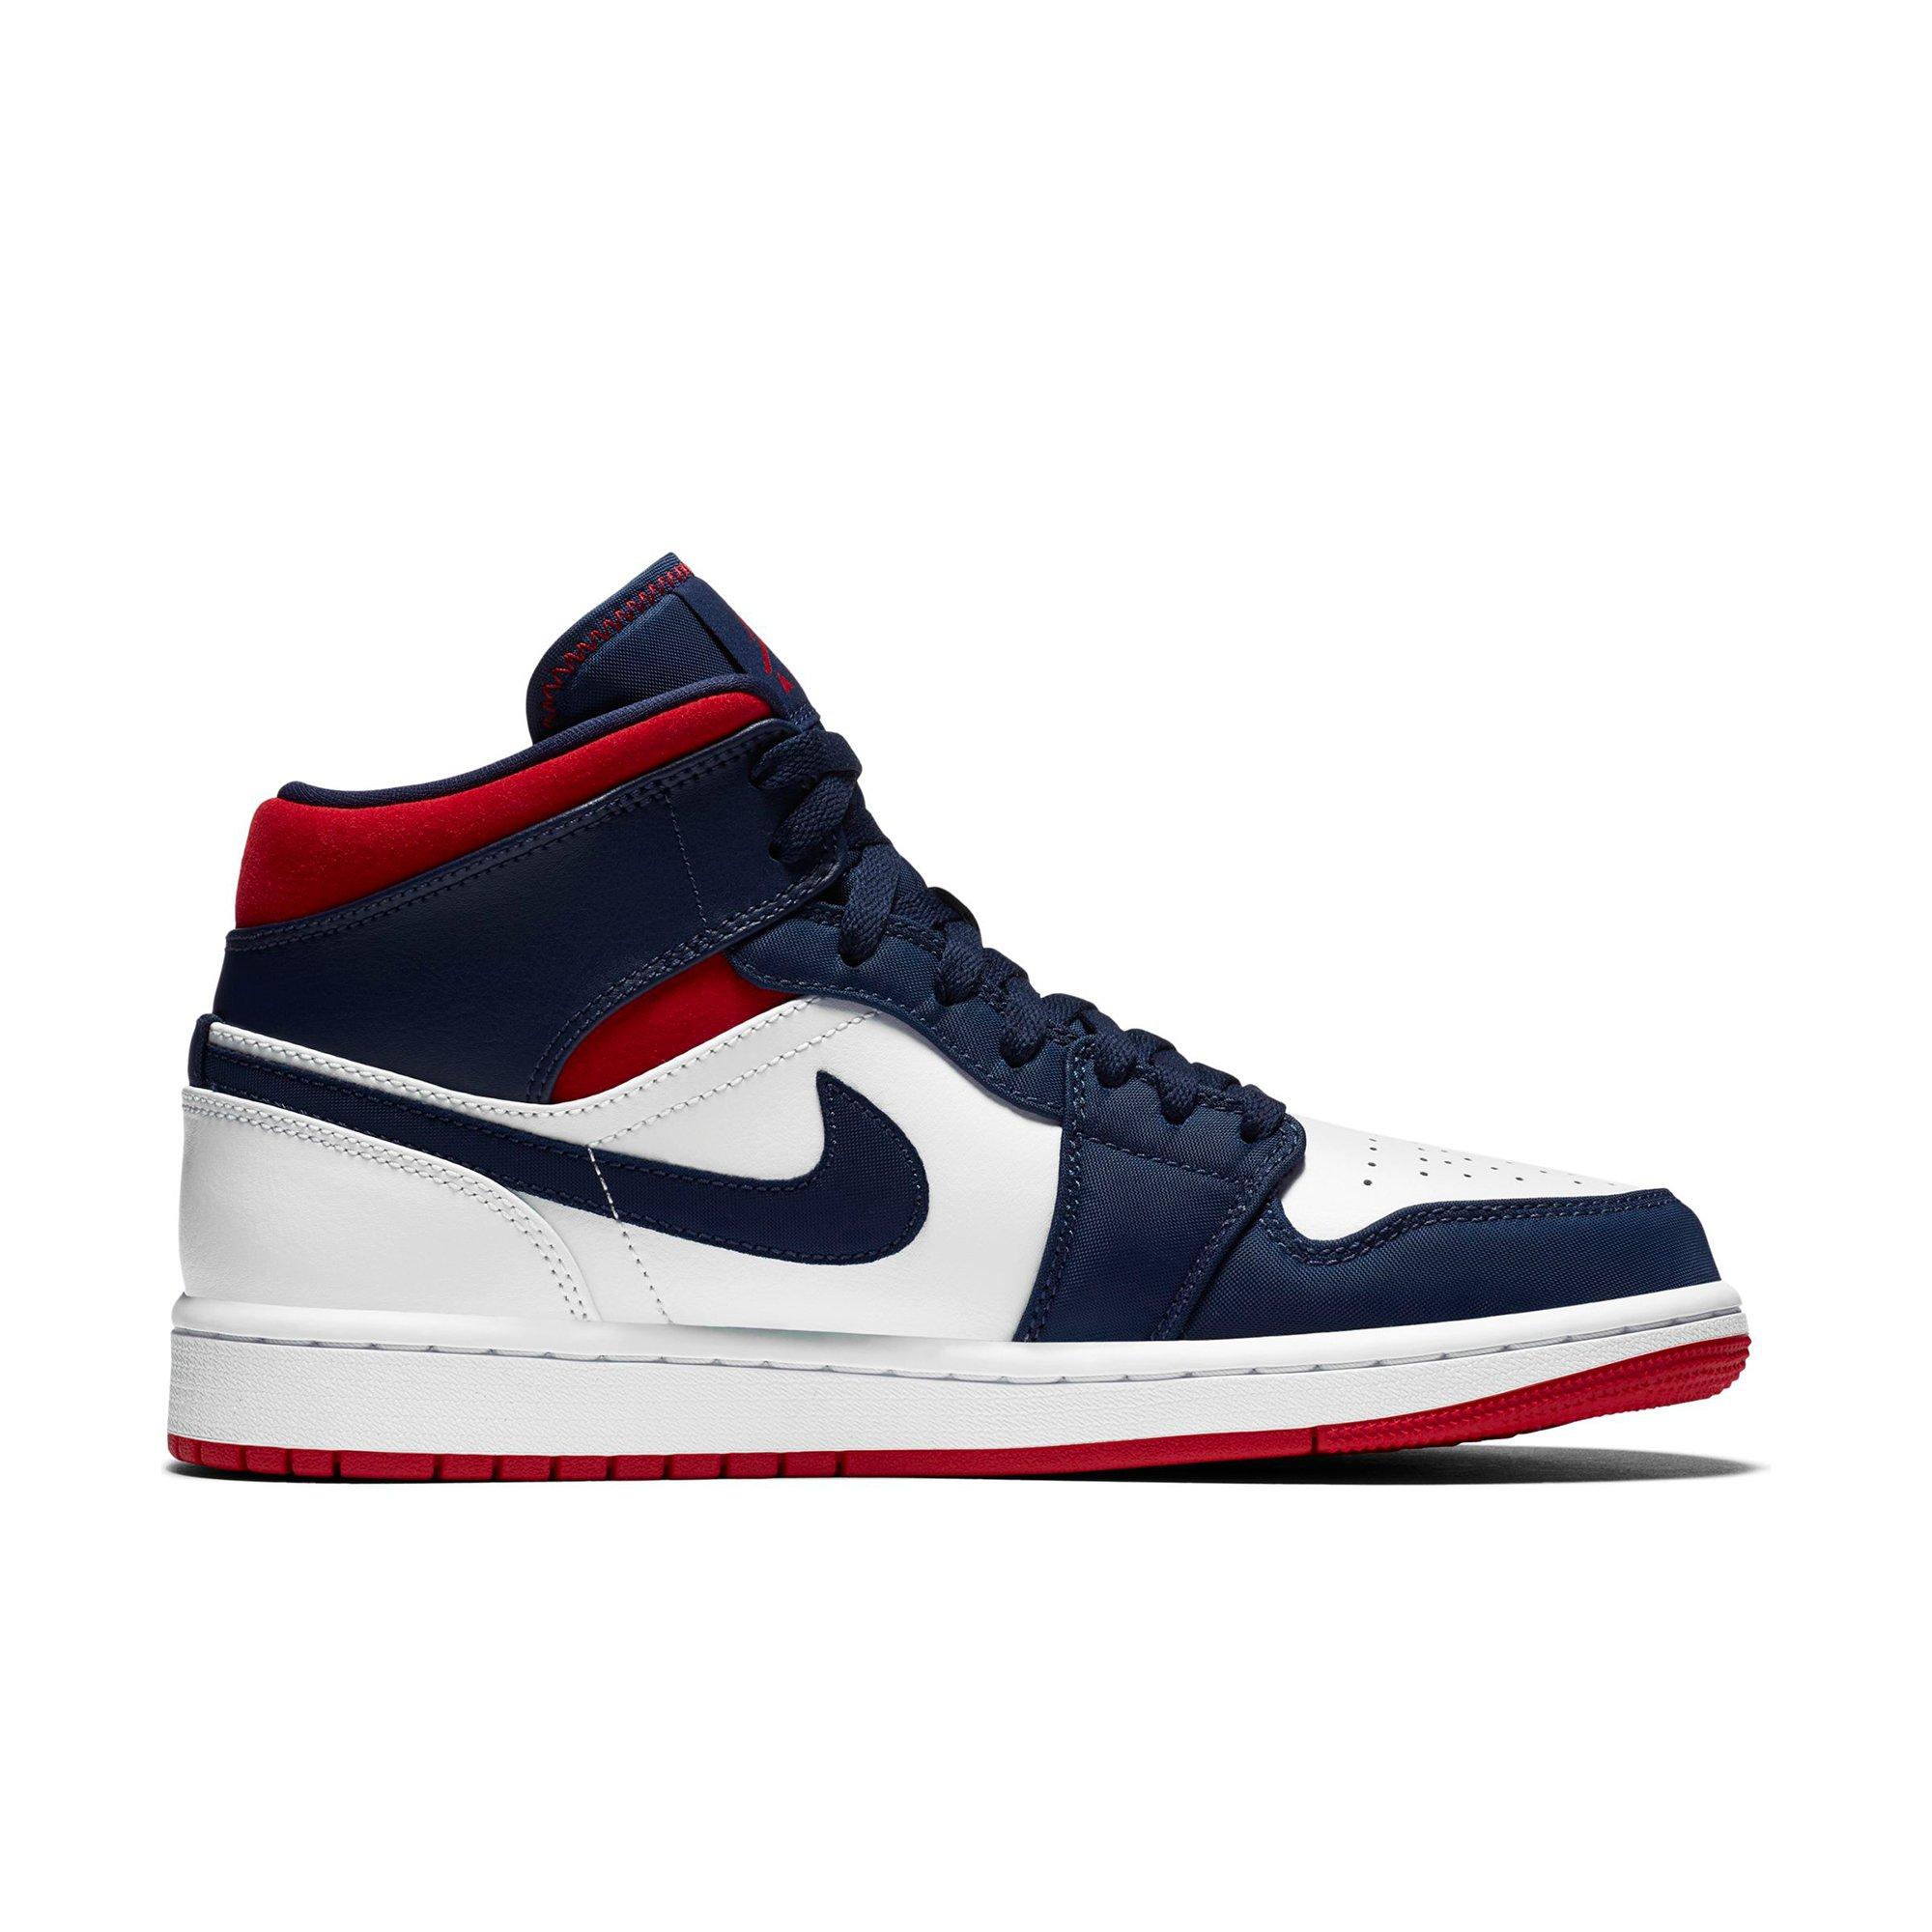 blue white and red jordan 1s